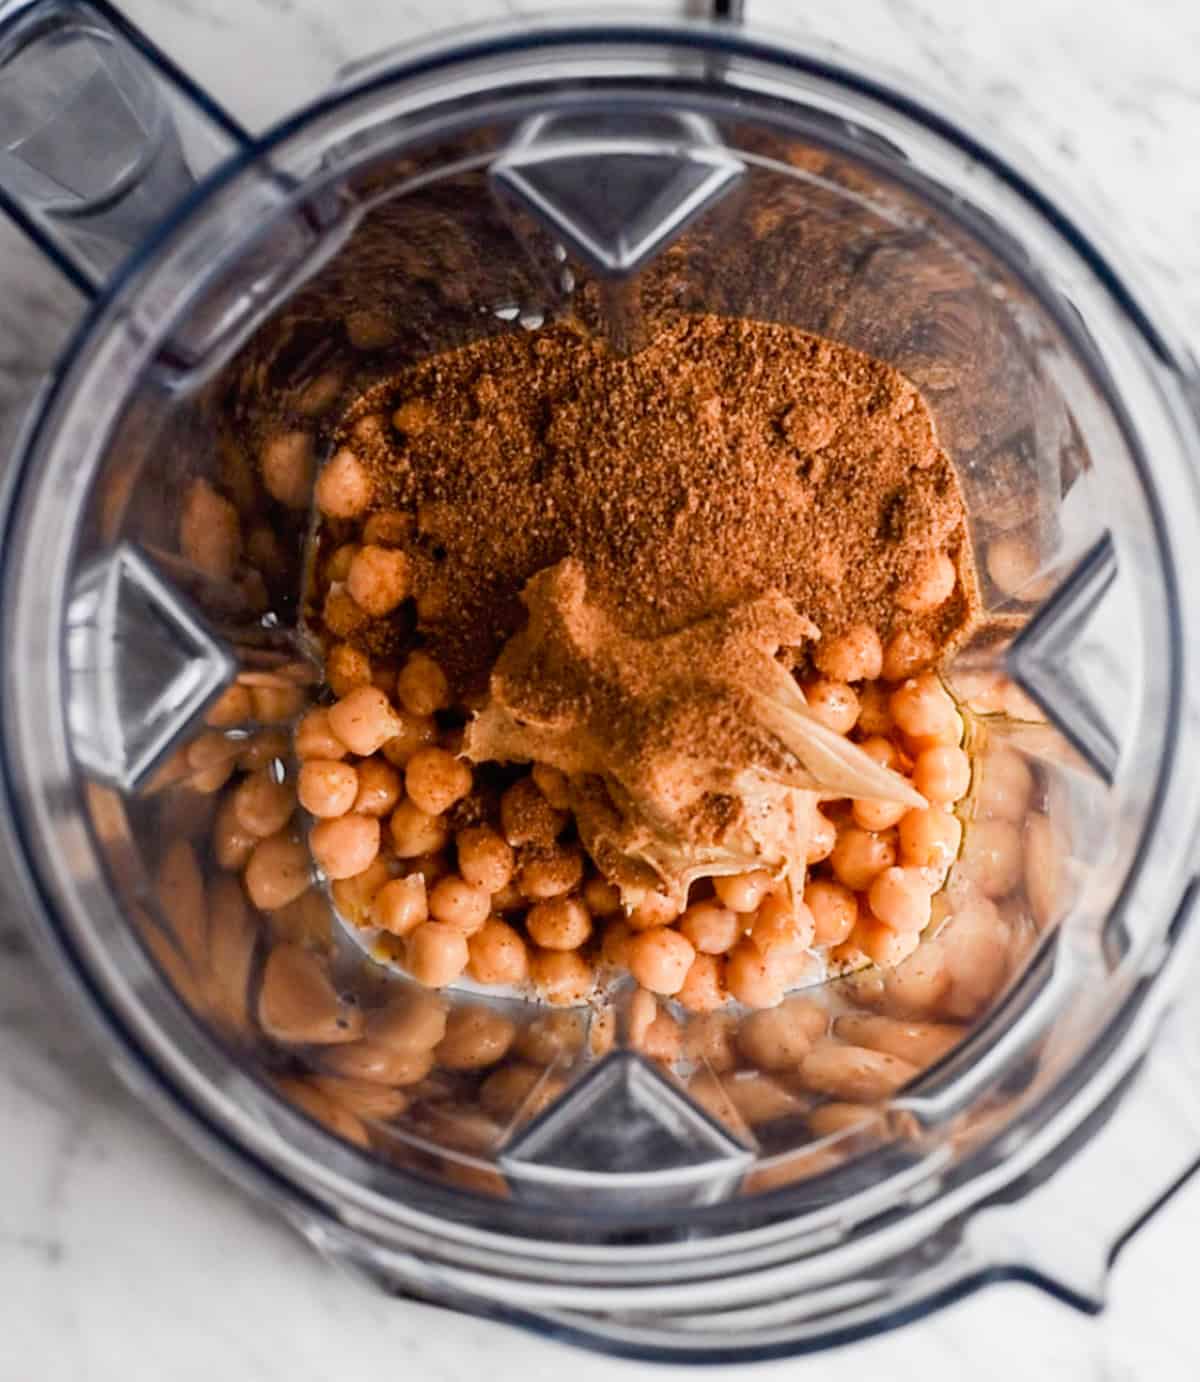 How to Make Chocolate Hummus - adding ingredients to the blending container before blending